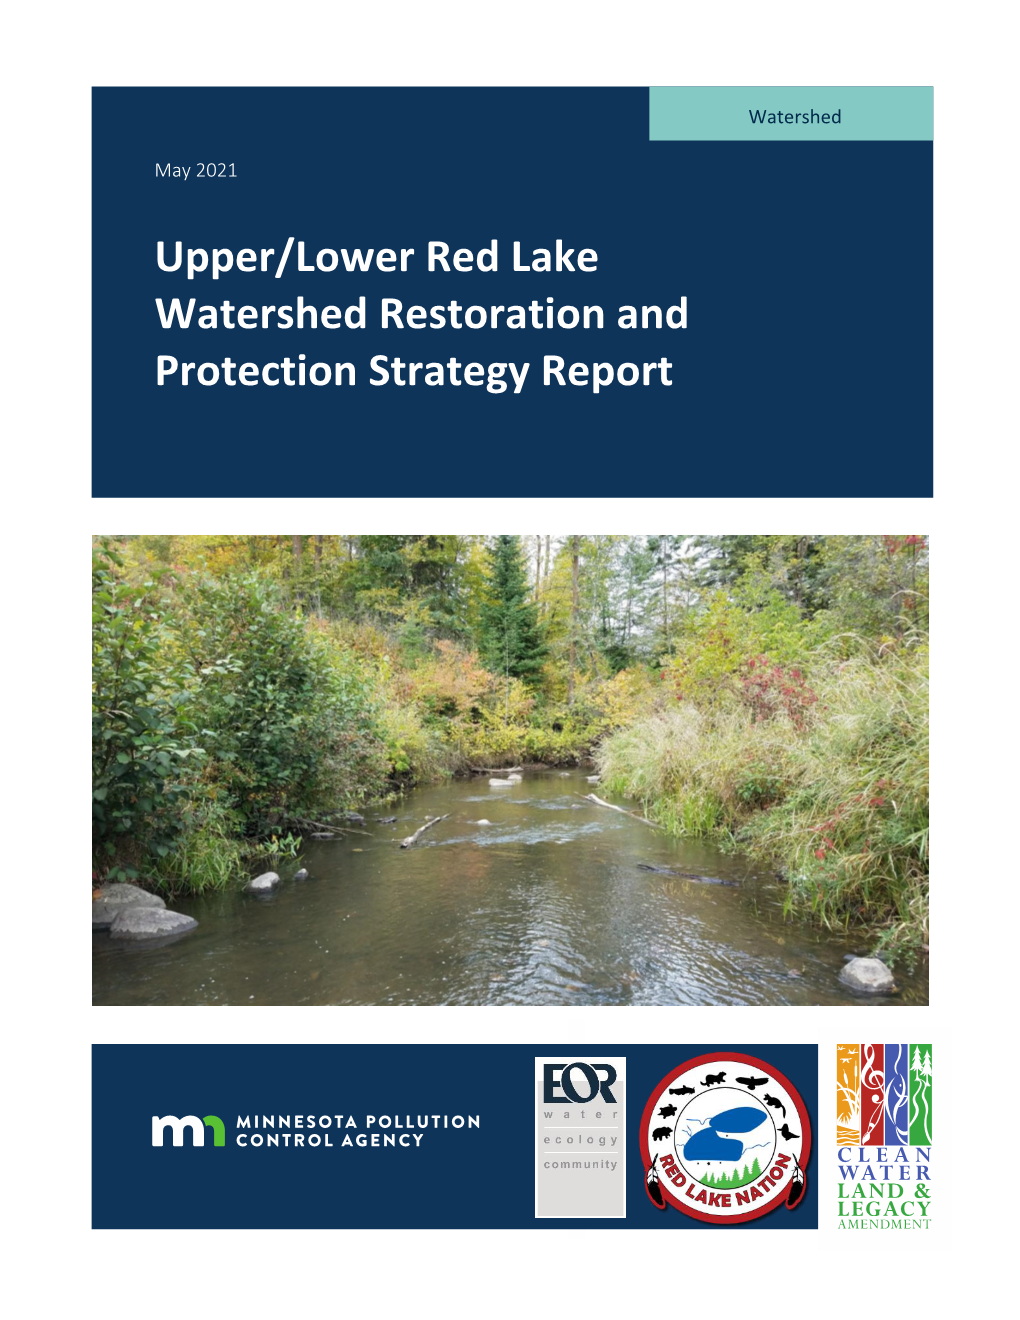 Upper/Lower Red Lake Watershed Restoration and Protection Strategy Report